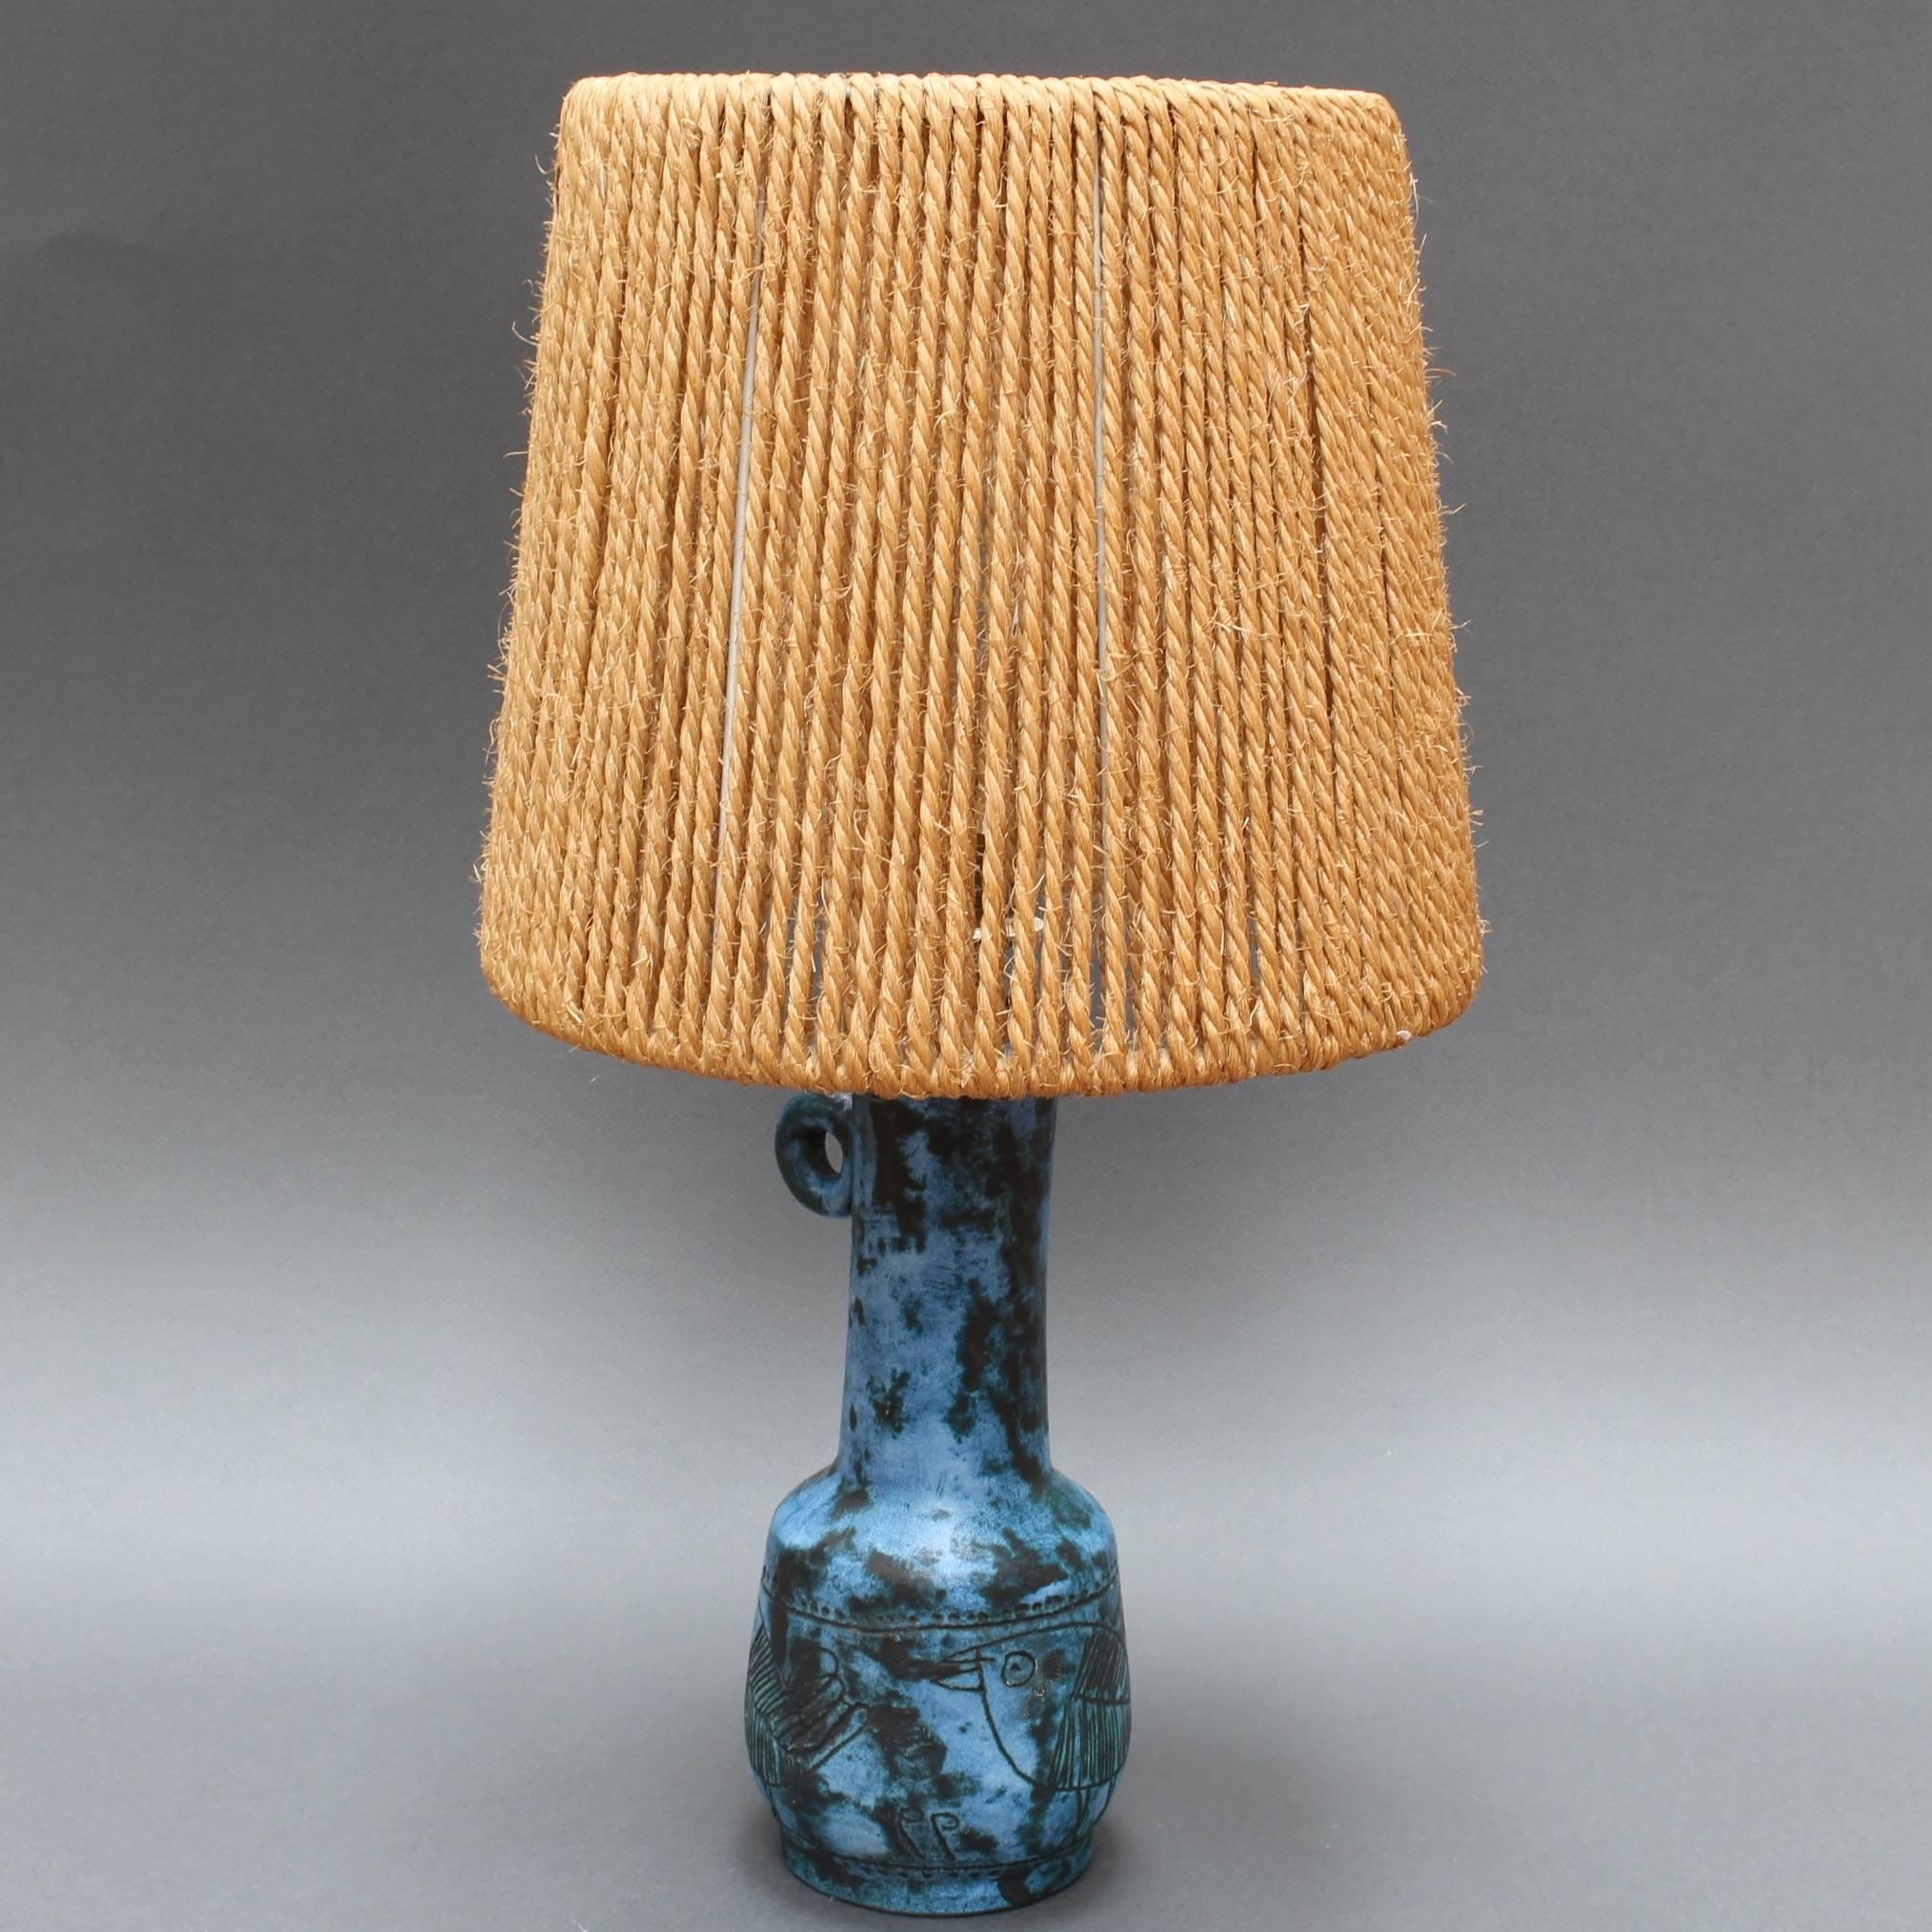 French Ceramic Table Lamp by Jacques Blin, circa 1950s